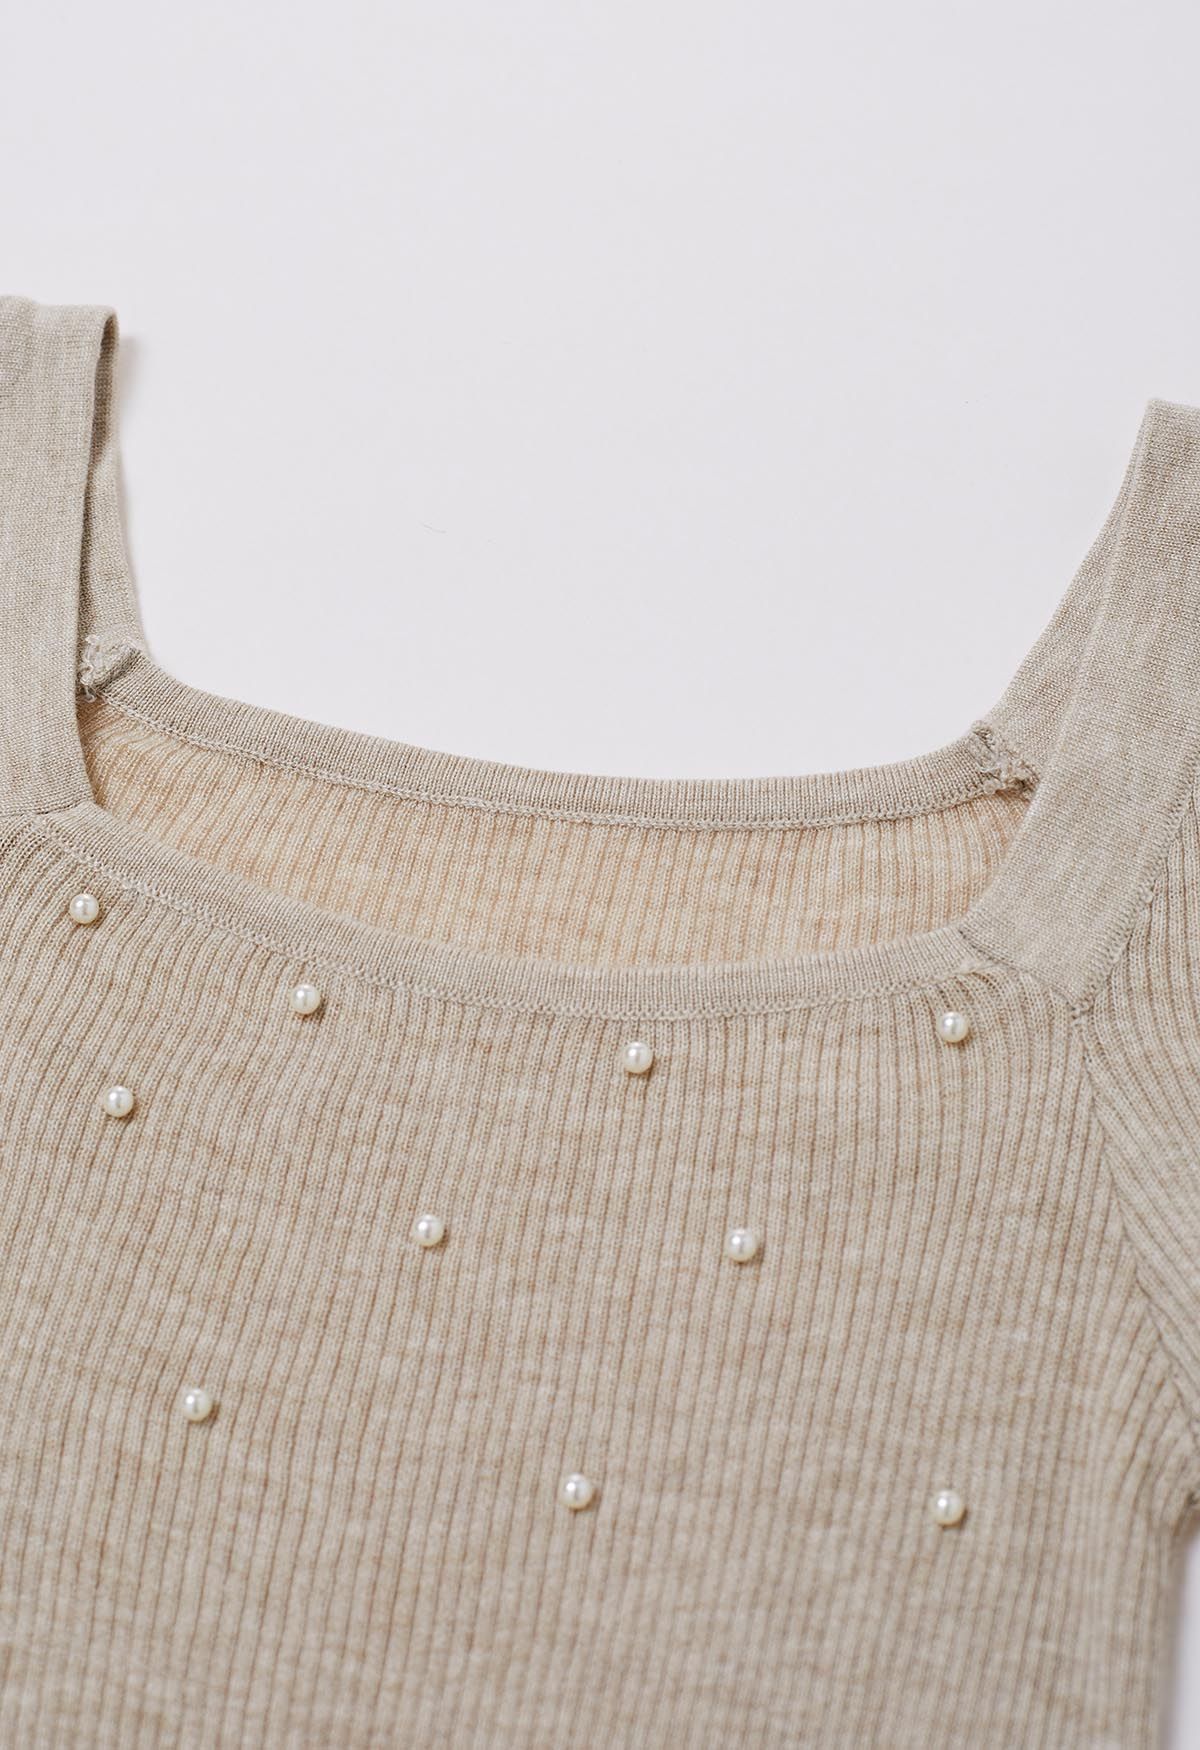 Square Neck Pearly Fitted Knit Top in Oatmeal